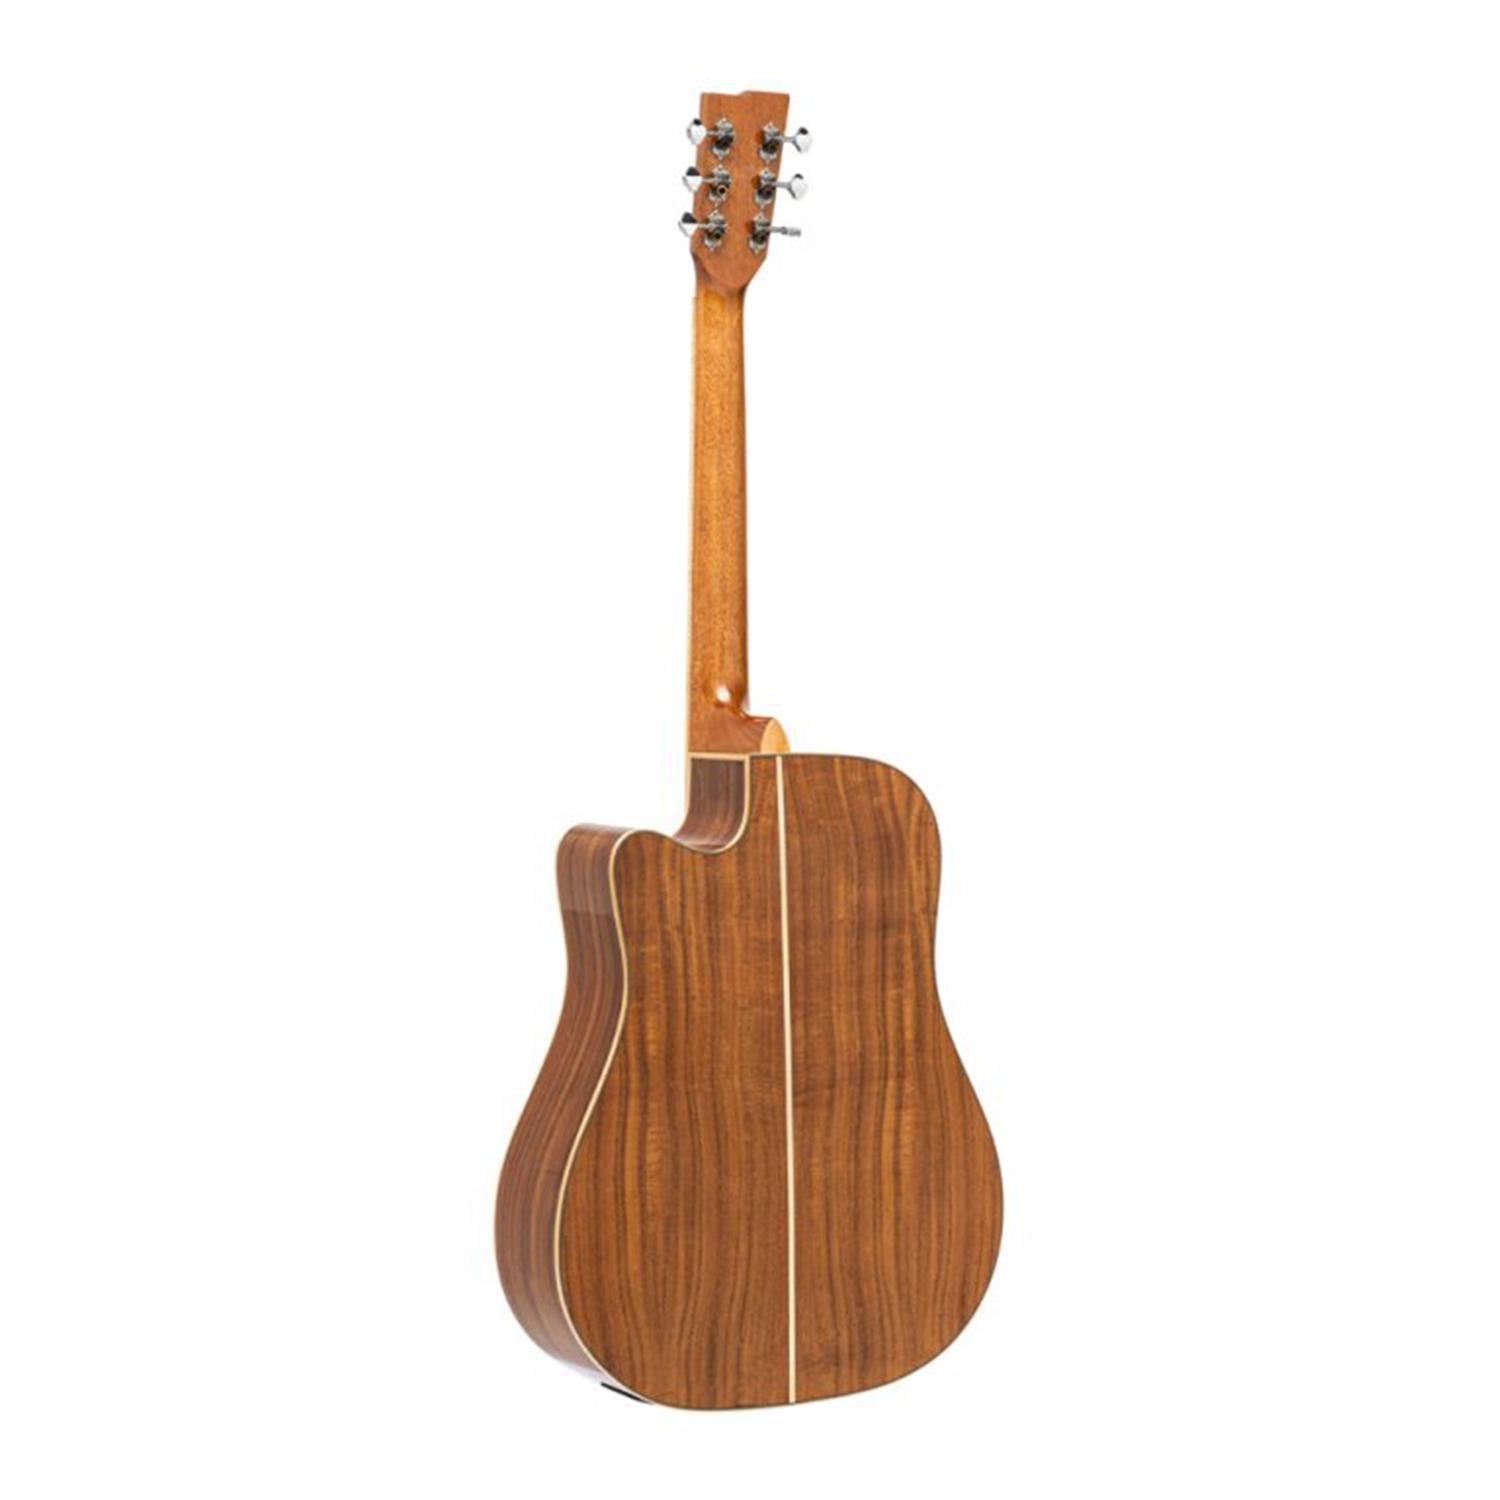 Stagg SA45 DCE-AC Series 45 Natural Dreadnought Acoustic-Electric Guitar - DY Pro Audio